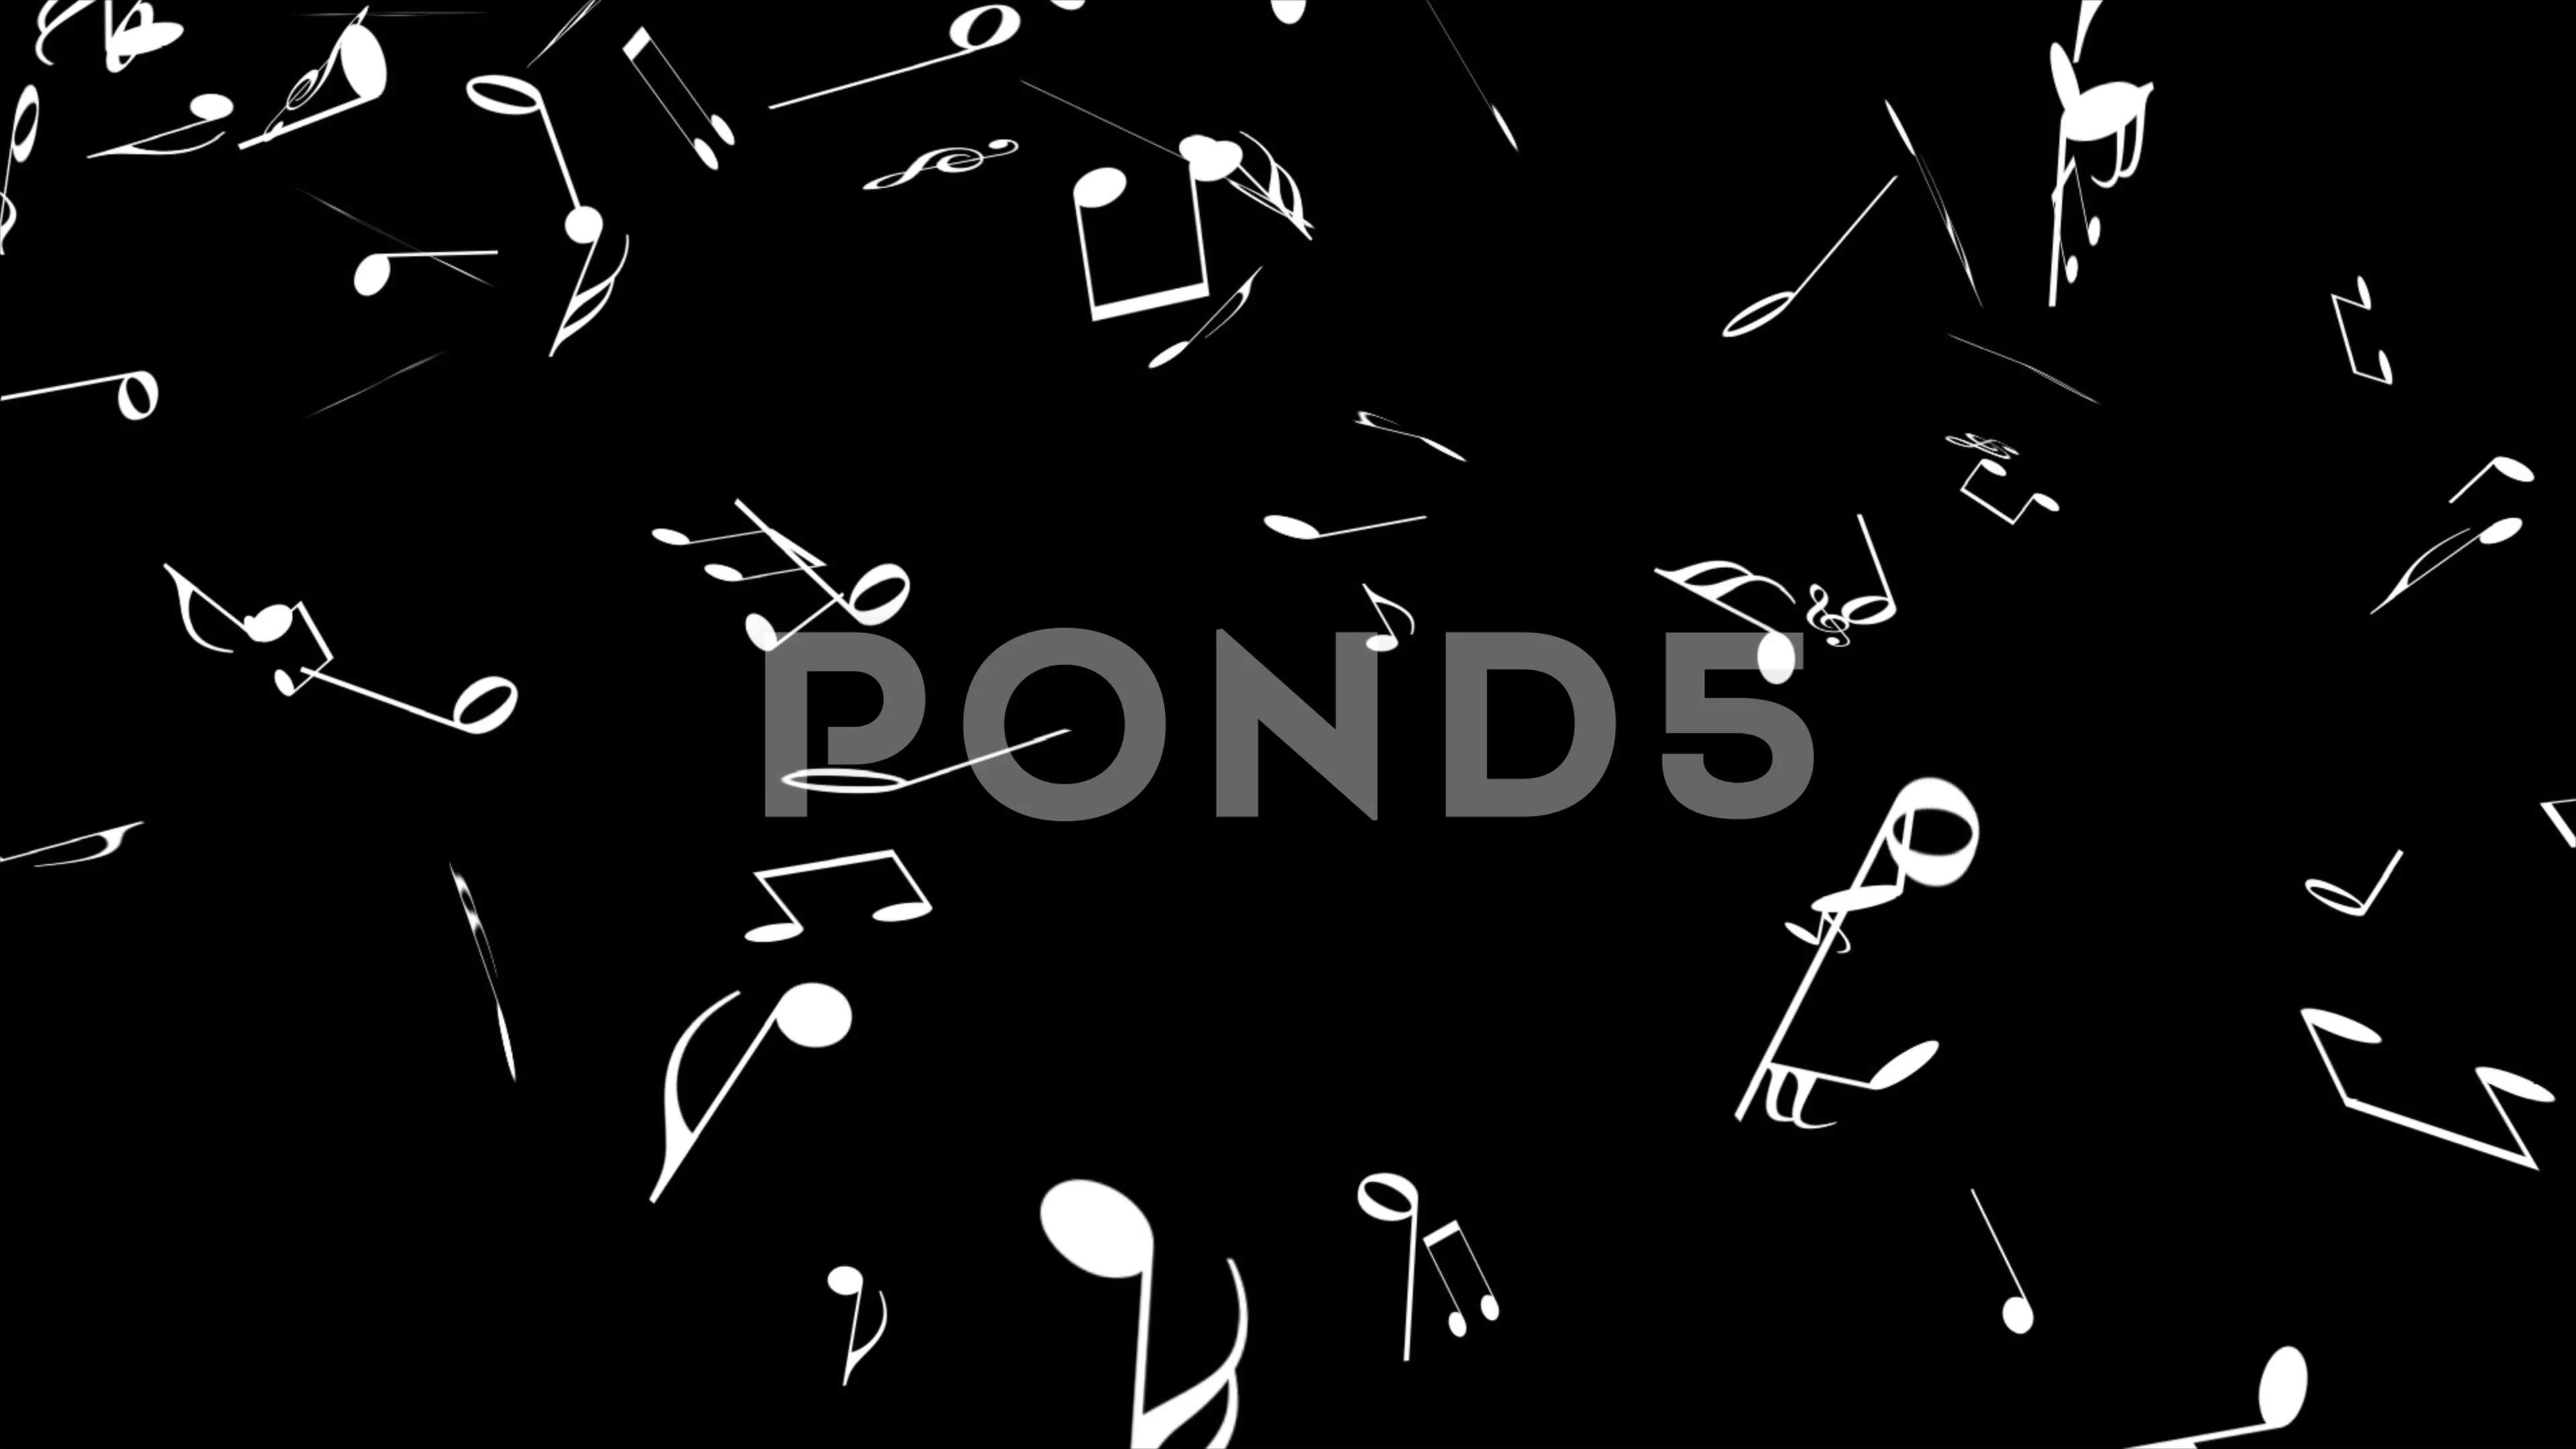 music note background black and white